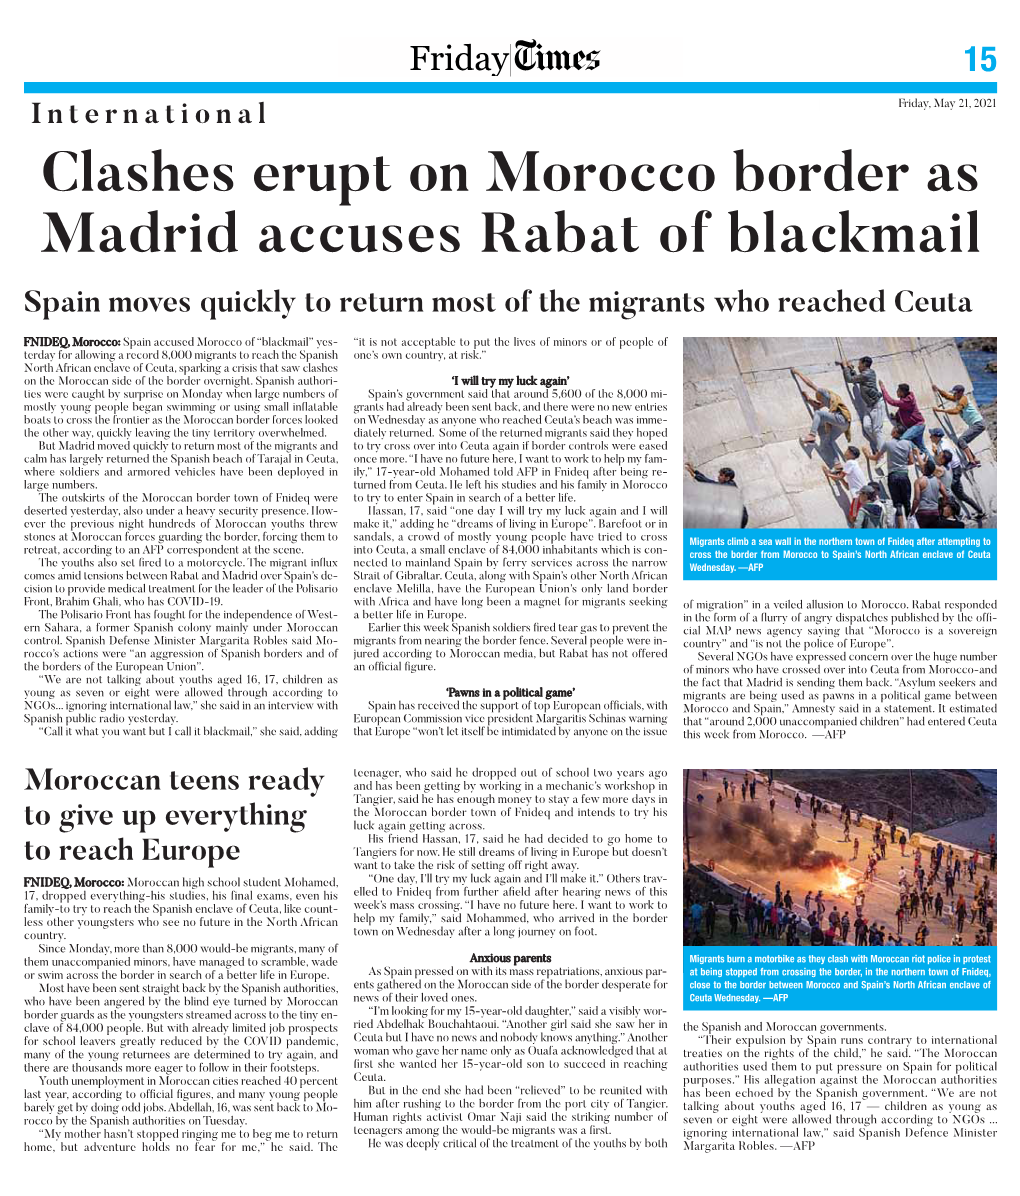 Clashes Erupt on Morocco Border As Madrid Accuses Rabat of Blackmail Spain Moves Quickly to Return Most of the Migrants Who Reached Ceuta